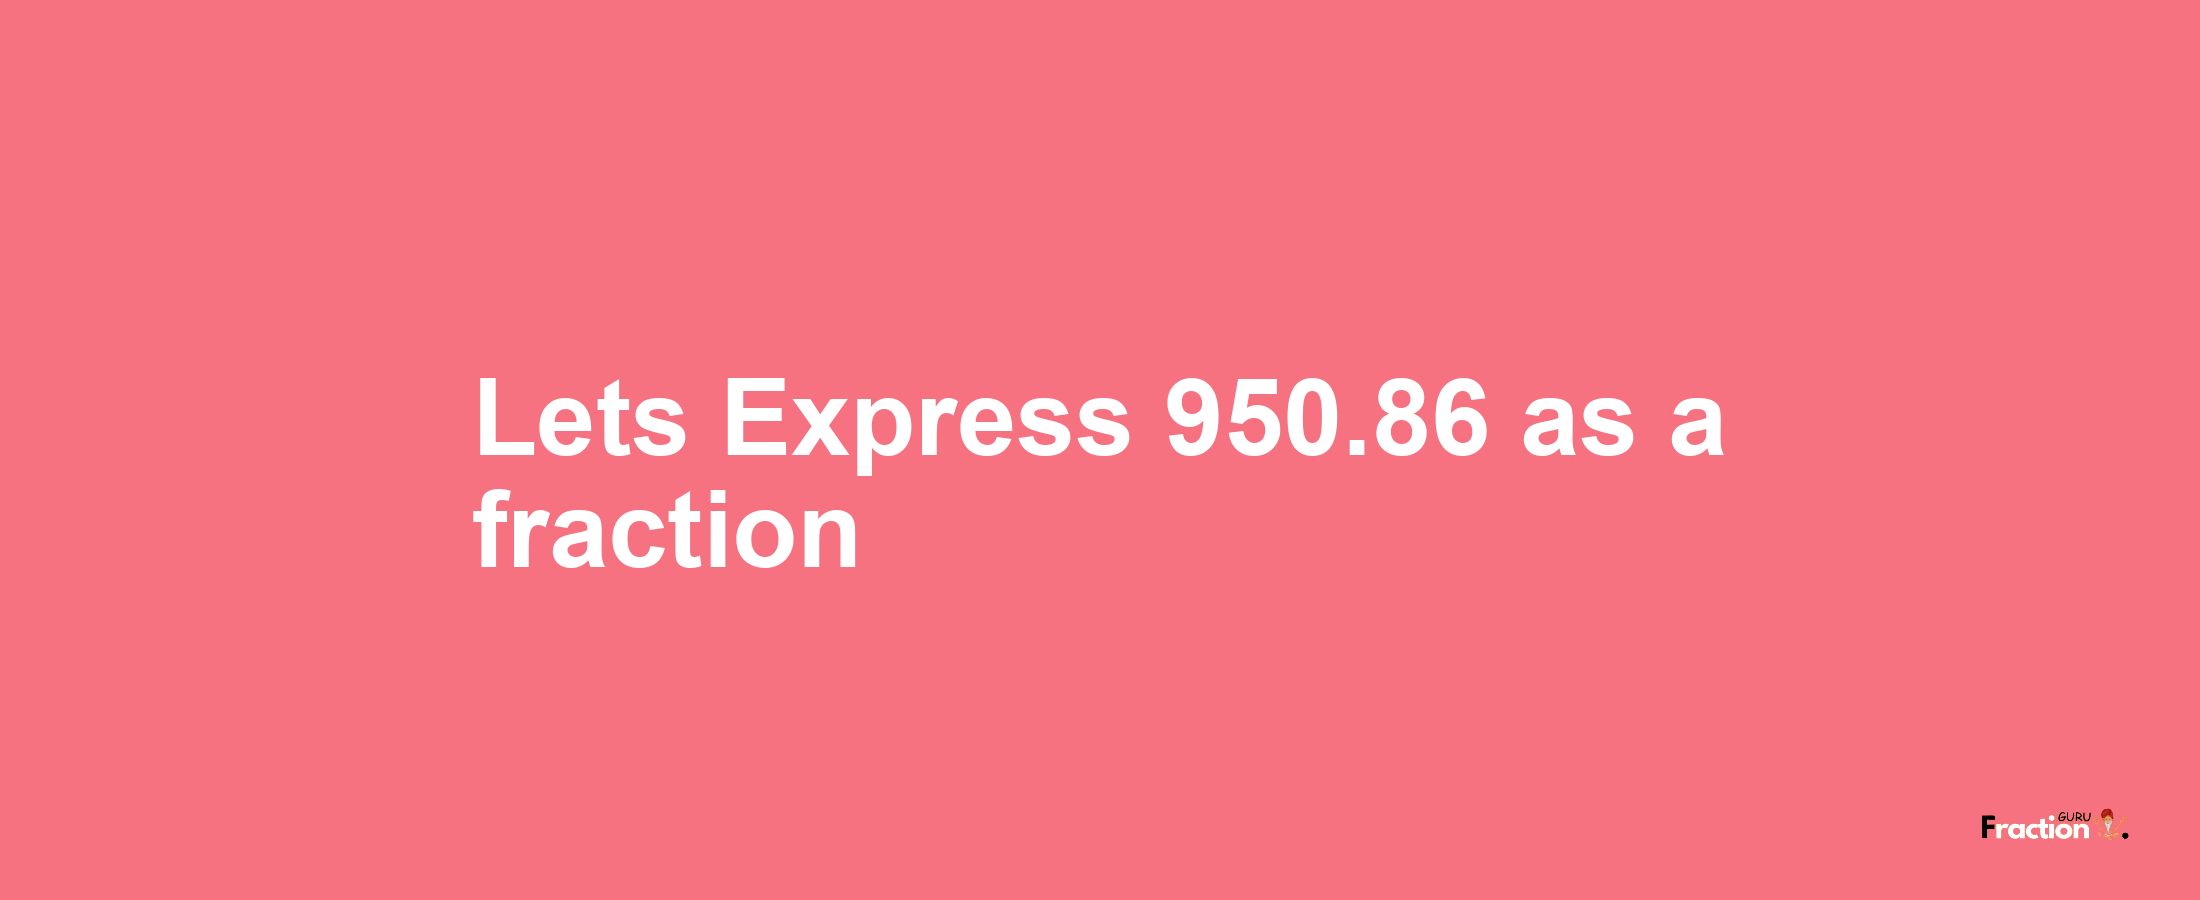 Lets Express 950.86 as afraction